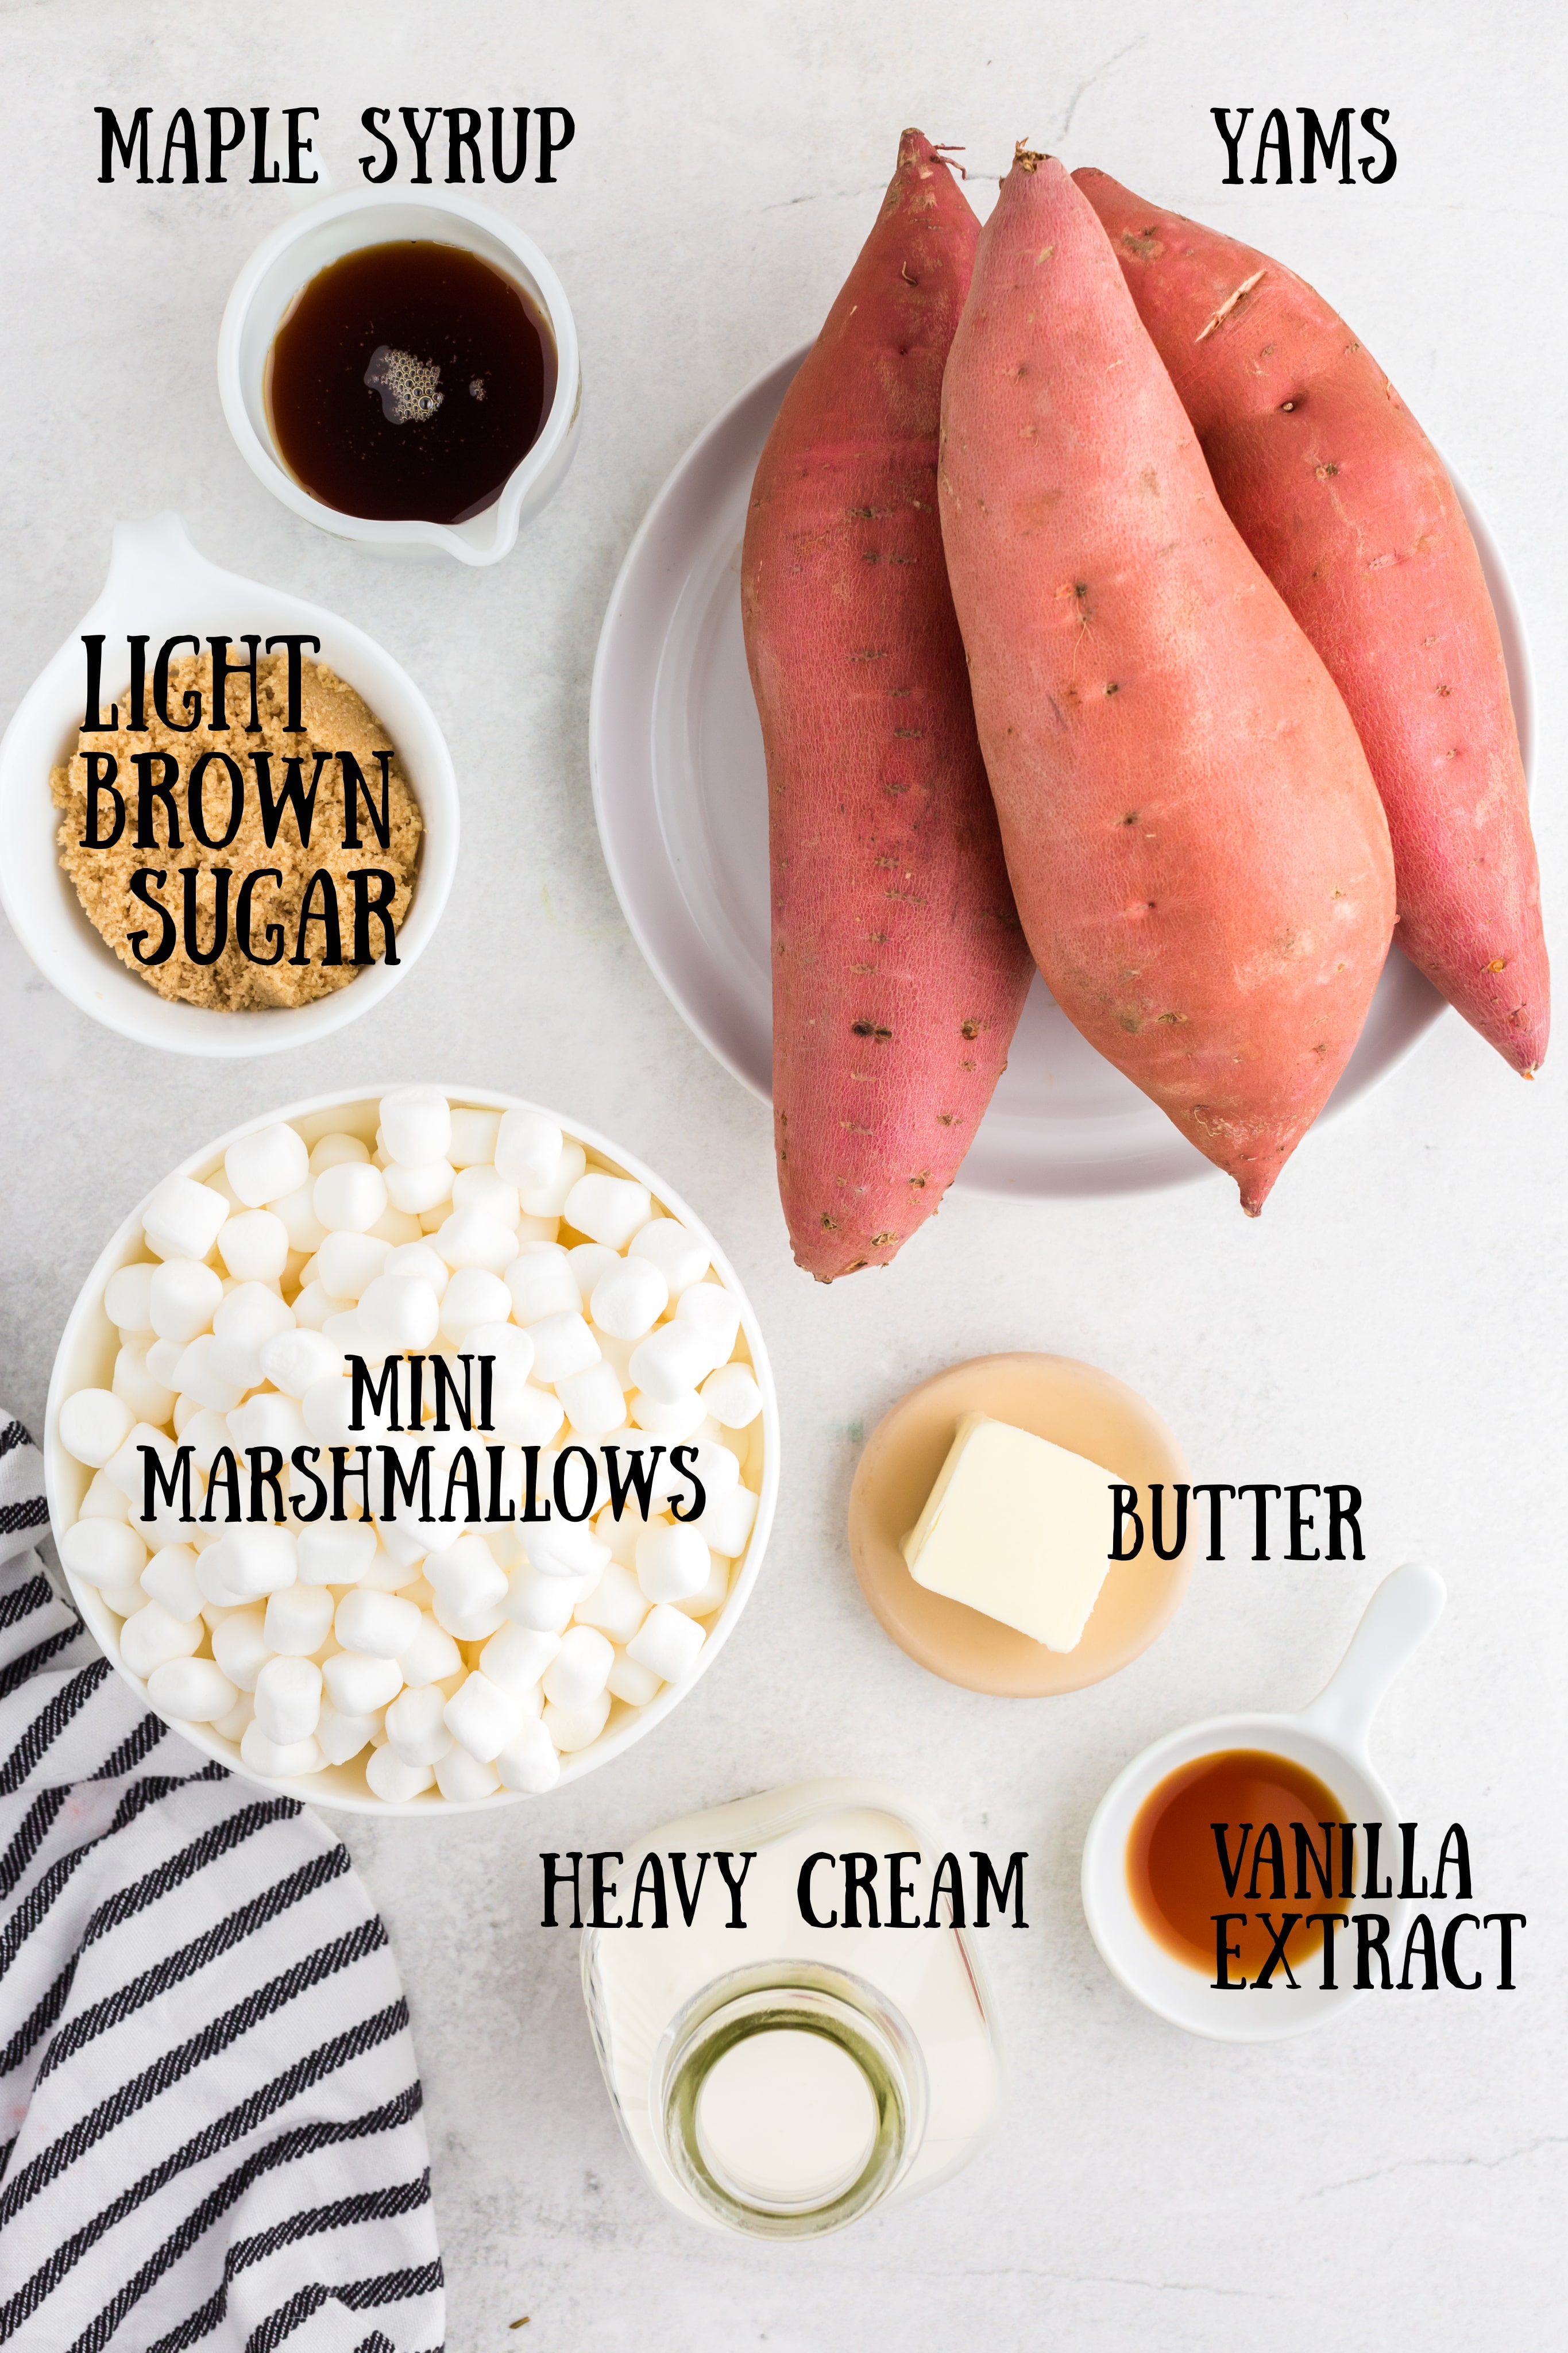 ingredients for candied yams including maple syrup, brown sugar, yams on white plate, mini marshmallows, a pat of butter, heavy cream in jar, and vanilla extract with text overlay